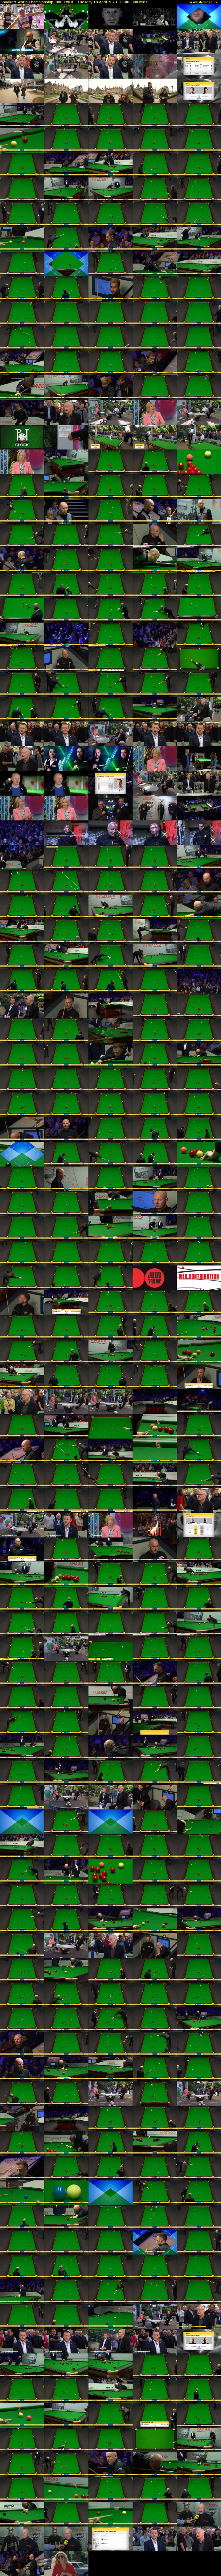 Snooker: World Championship (BBC TWO) Tuesday 18 April 2023 13:00 - 18:00